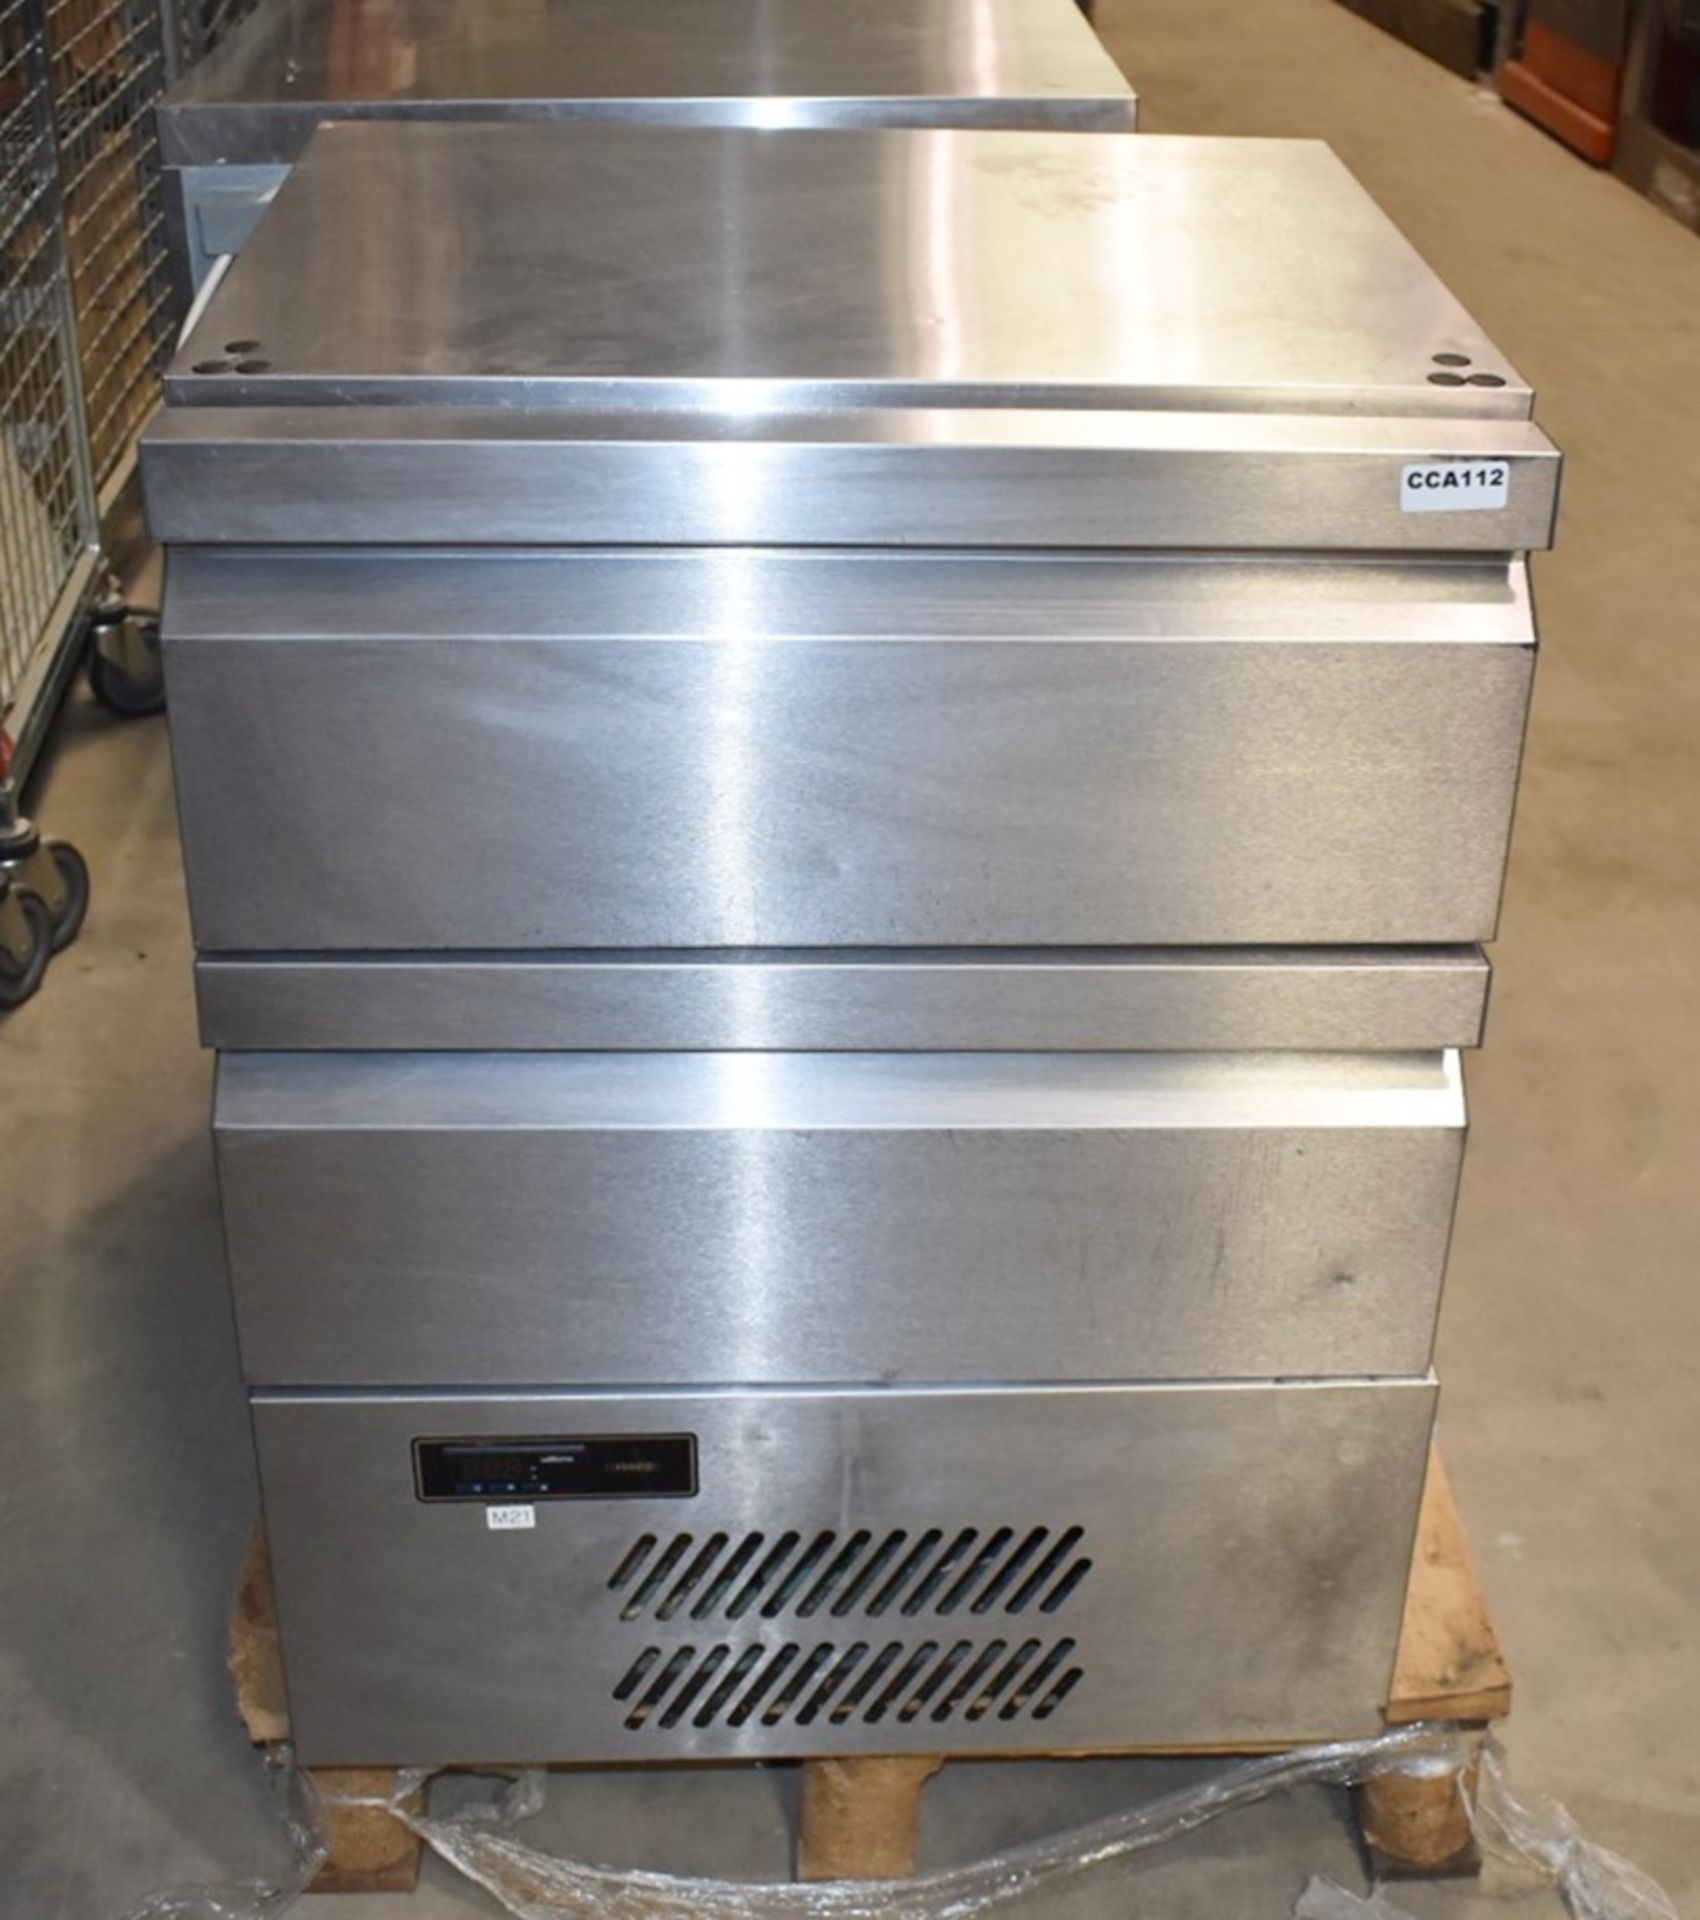 1 x Williams H5UC Double Drawer Commercial Fridge With Stainless Steel Exterior - Image 2 of 7